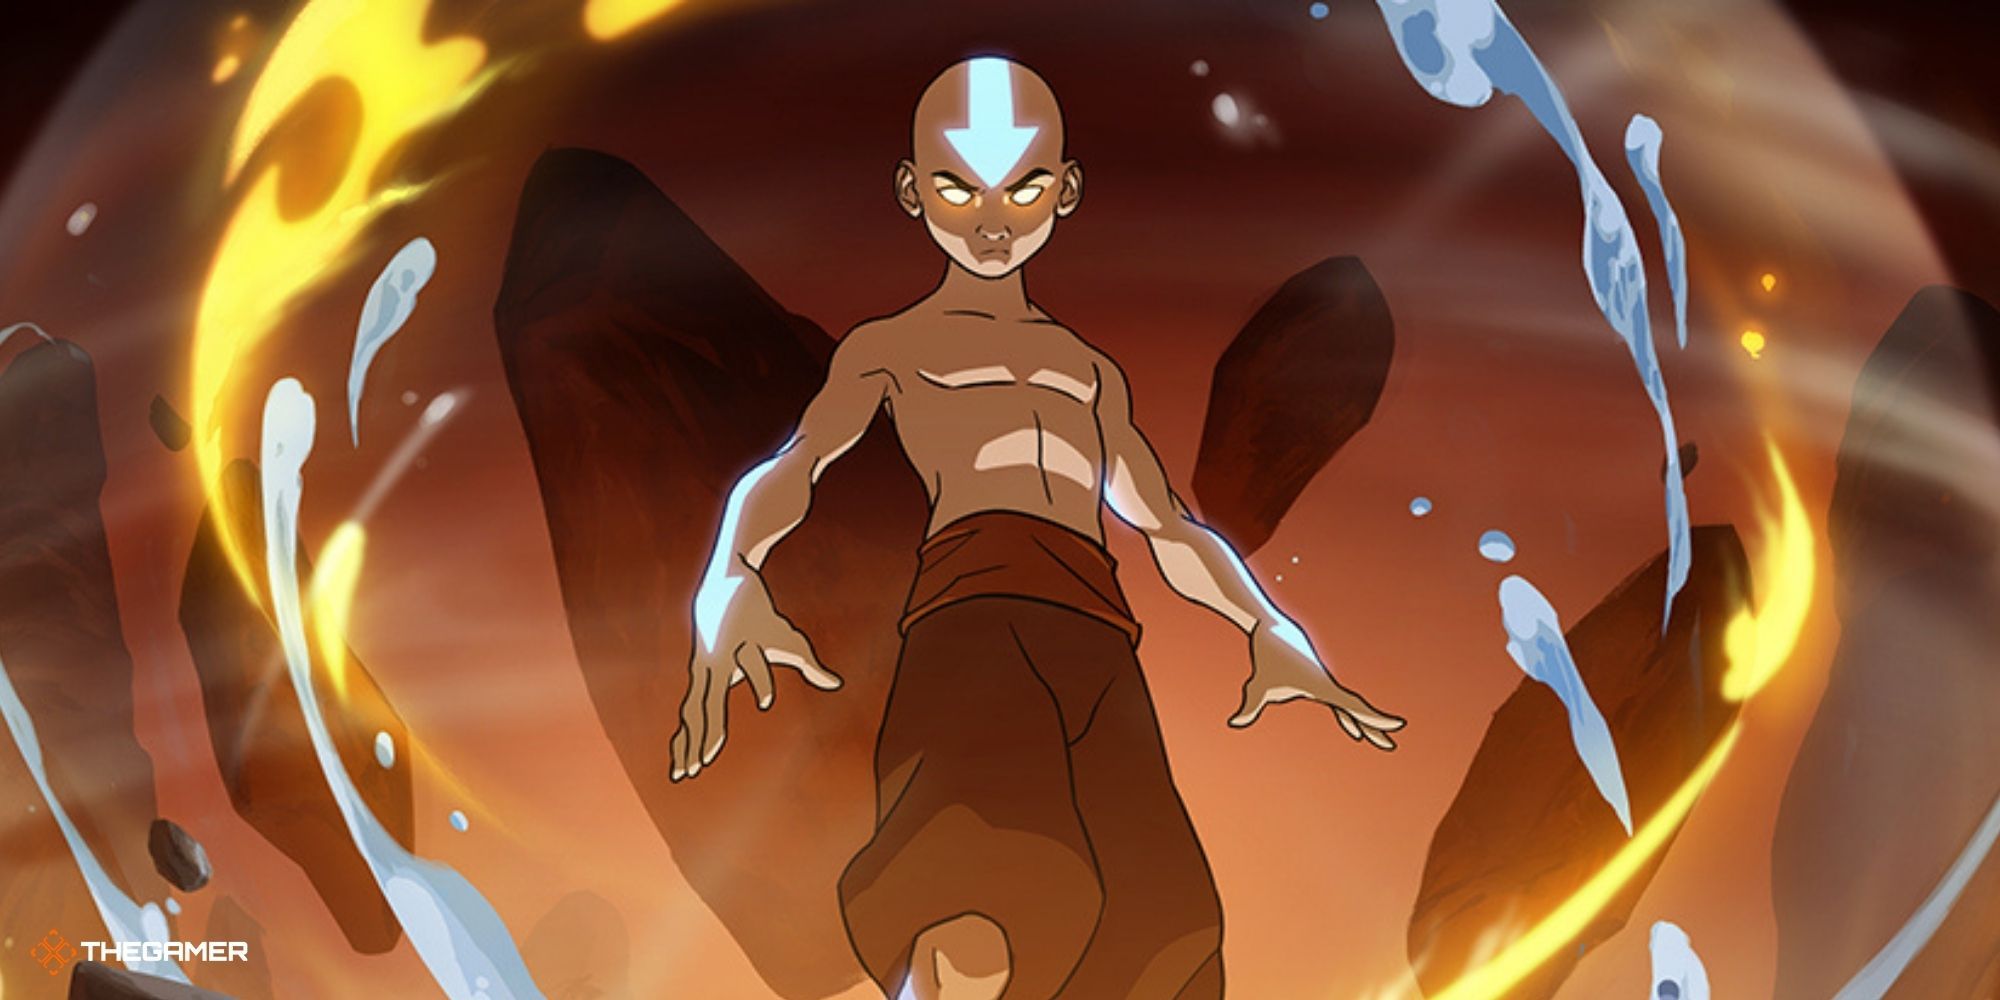 Avatar The Last Airbender - Aang Avatar State (Smite promo art)